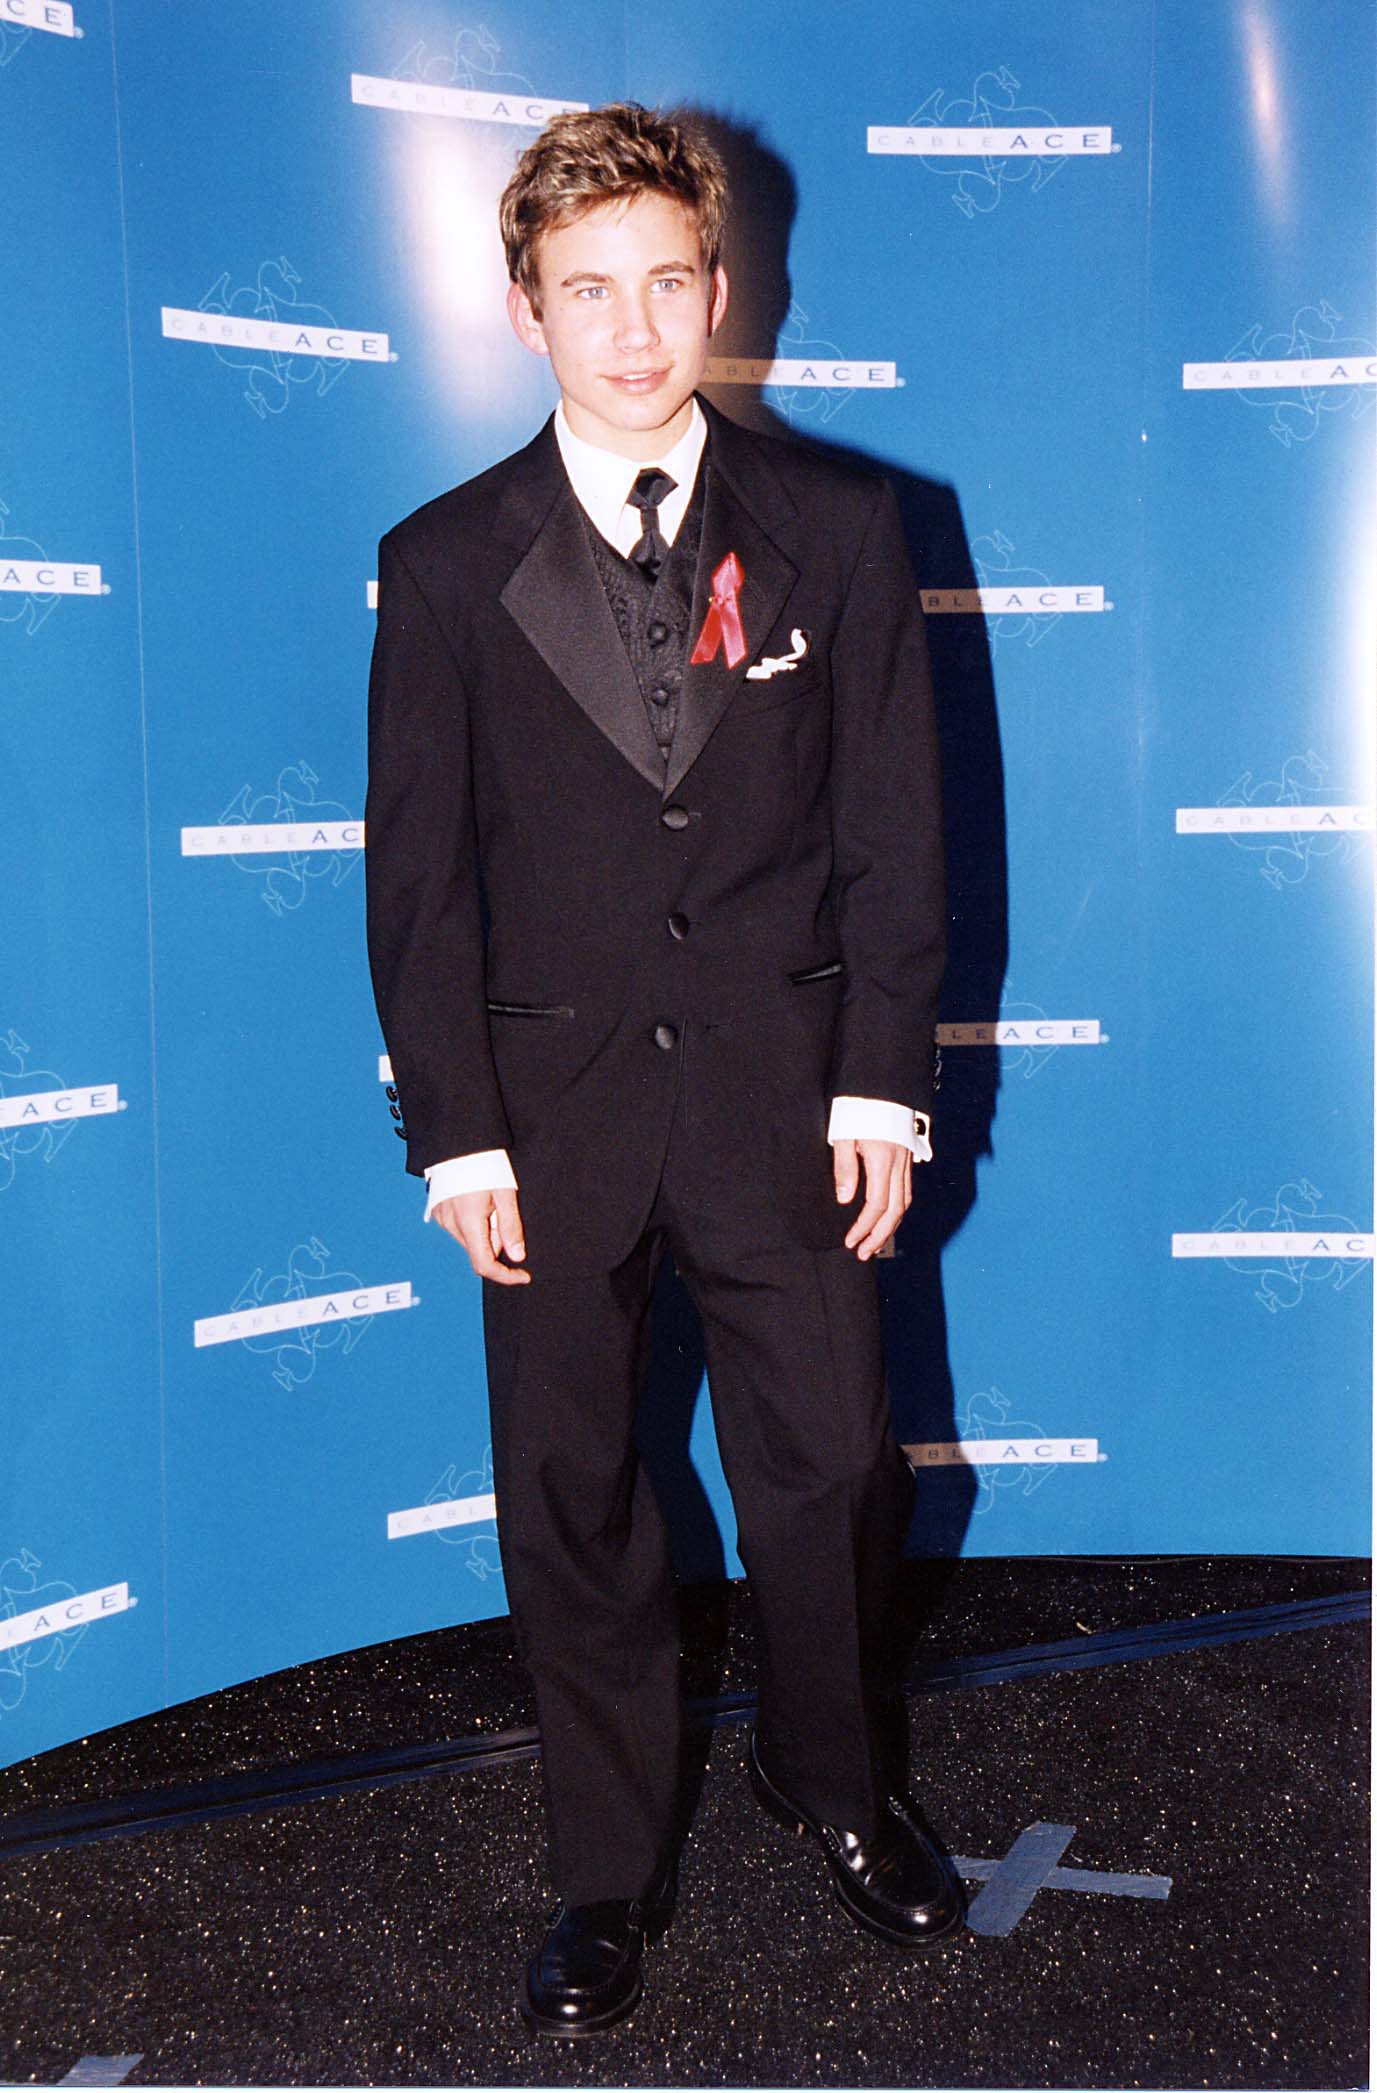 Jonathan Taylor Thomas aux Cable ACE Awards 1997 | Source : Getty Images